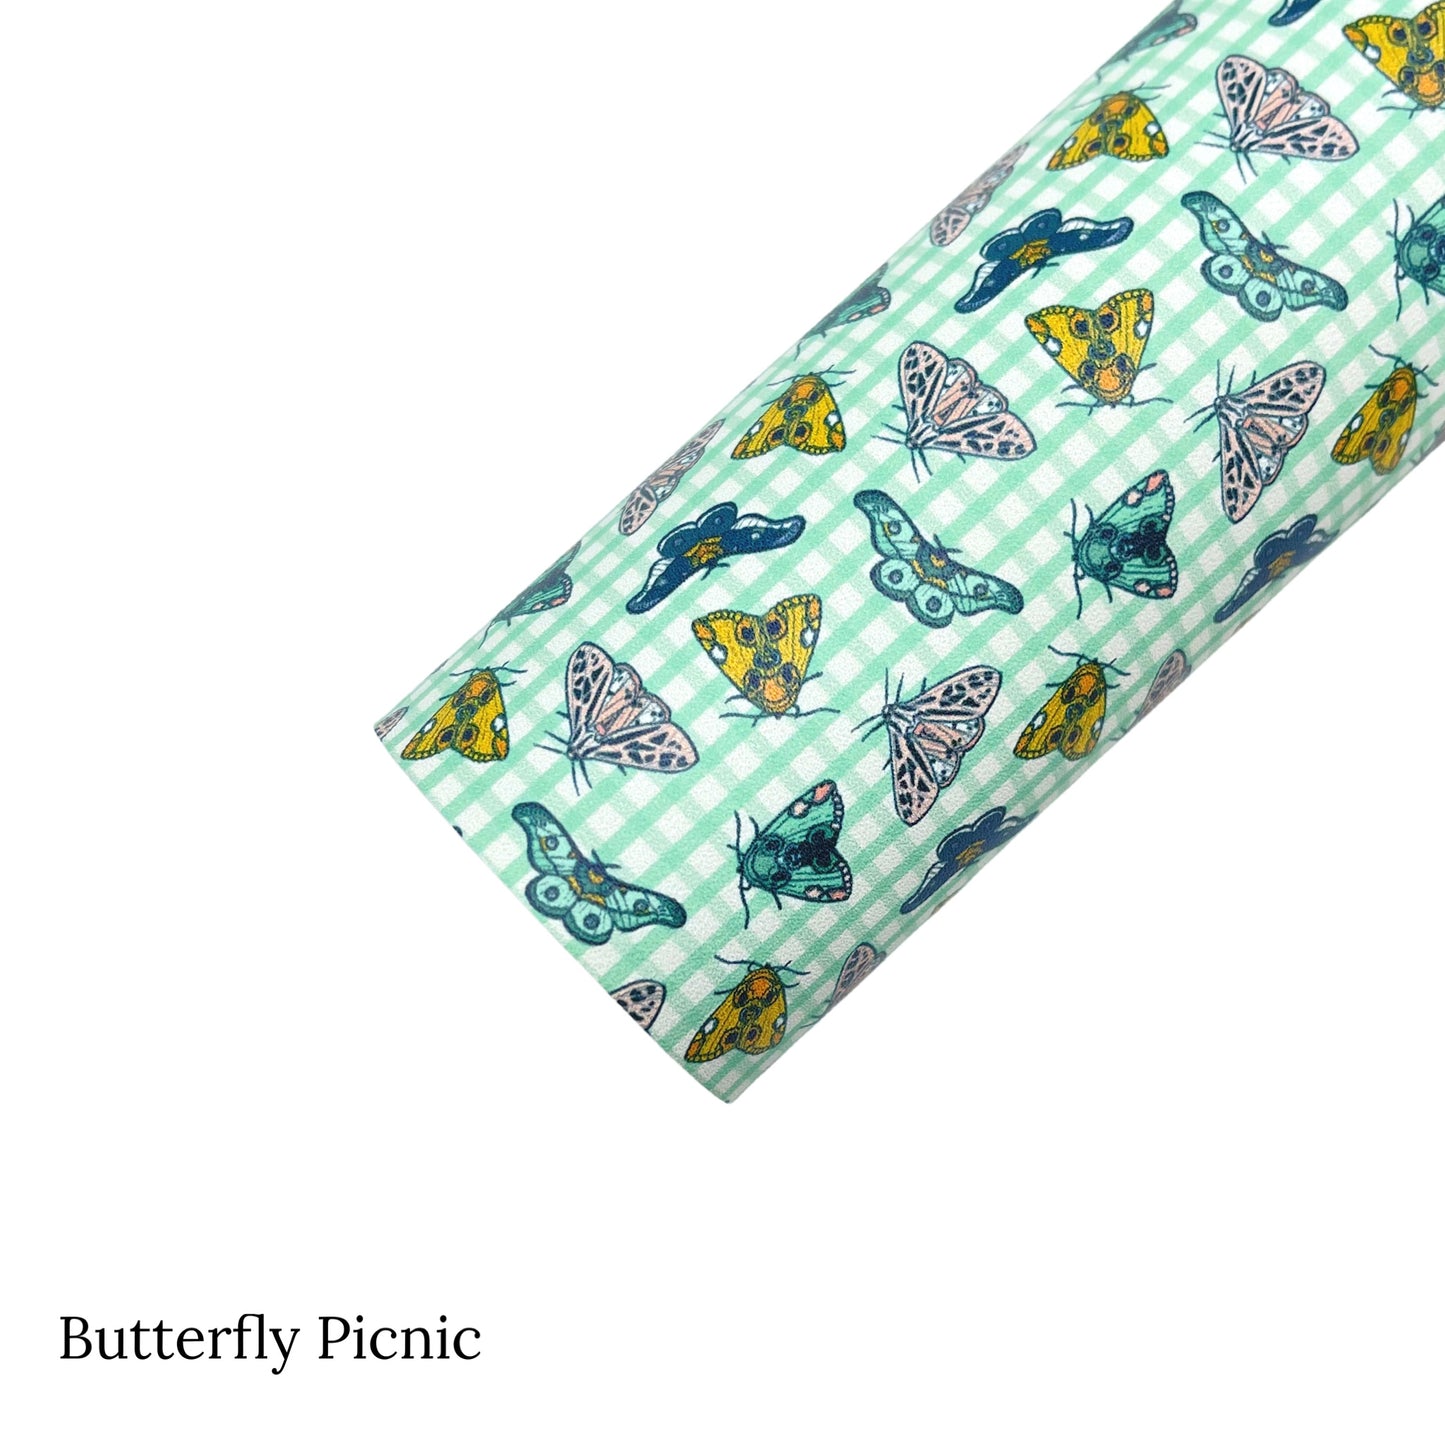 Spring meadow pattern faux leather sheets. Butterfly picnic pattern faux leather sheet. 